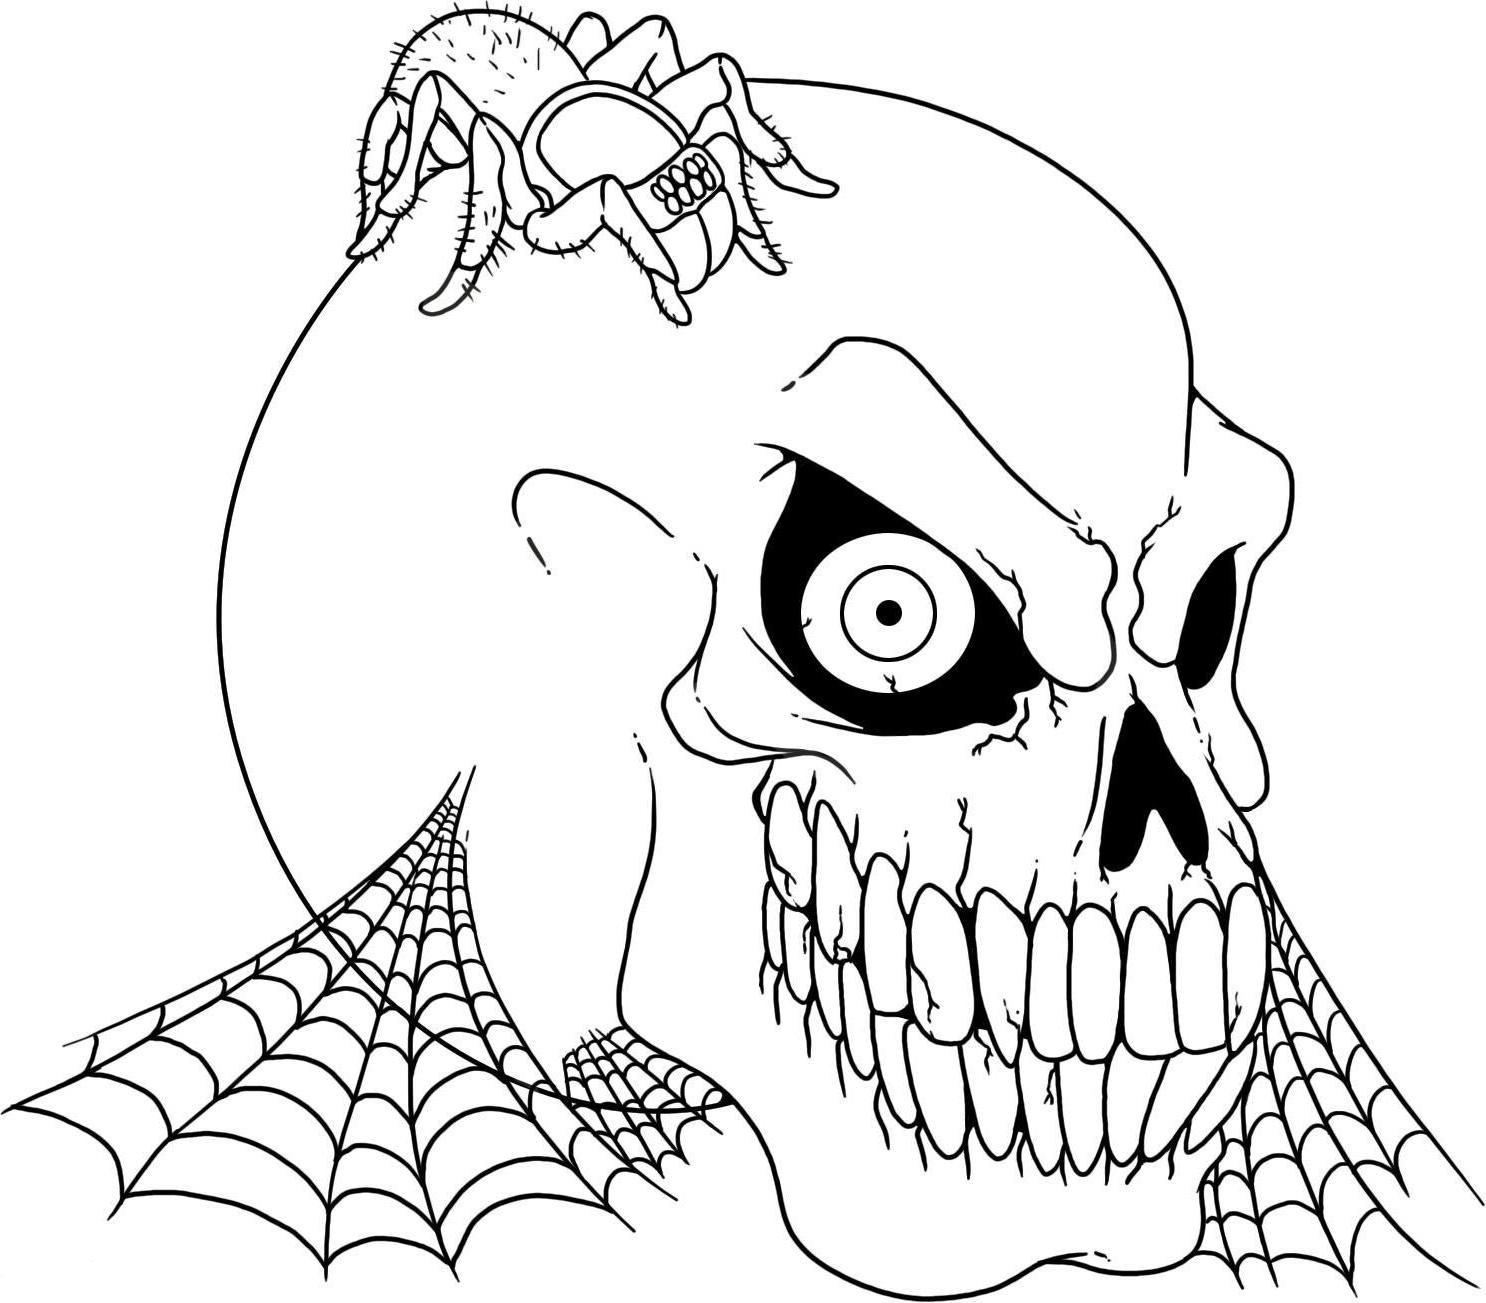 Free Scary Cartoon Coloring Page Download Free Scary Cartoon Coloring Page Png Images Free